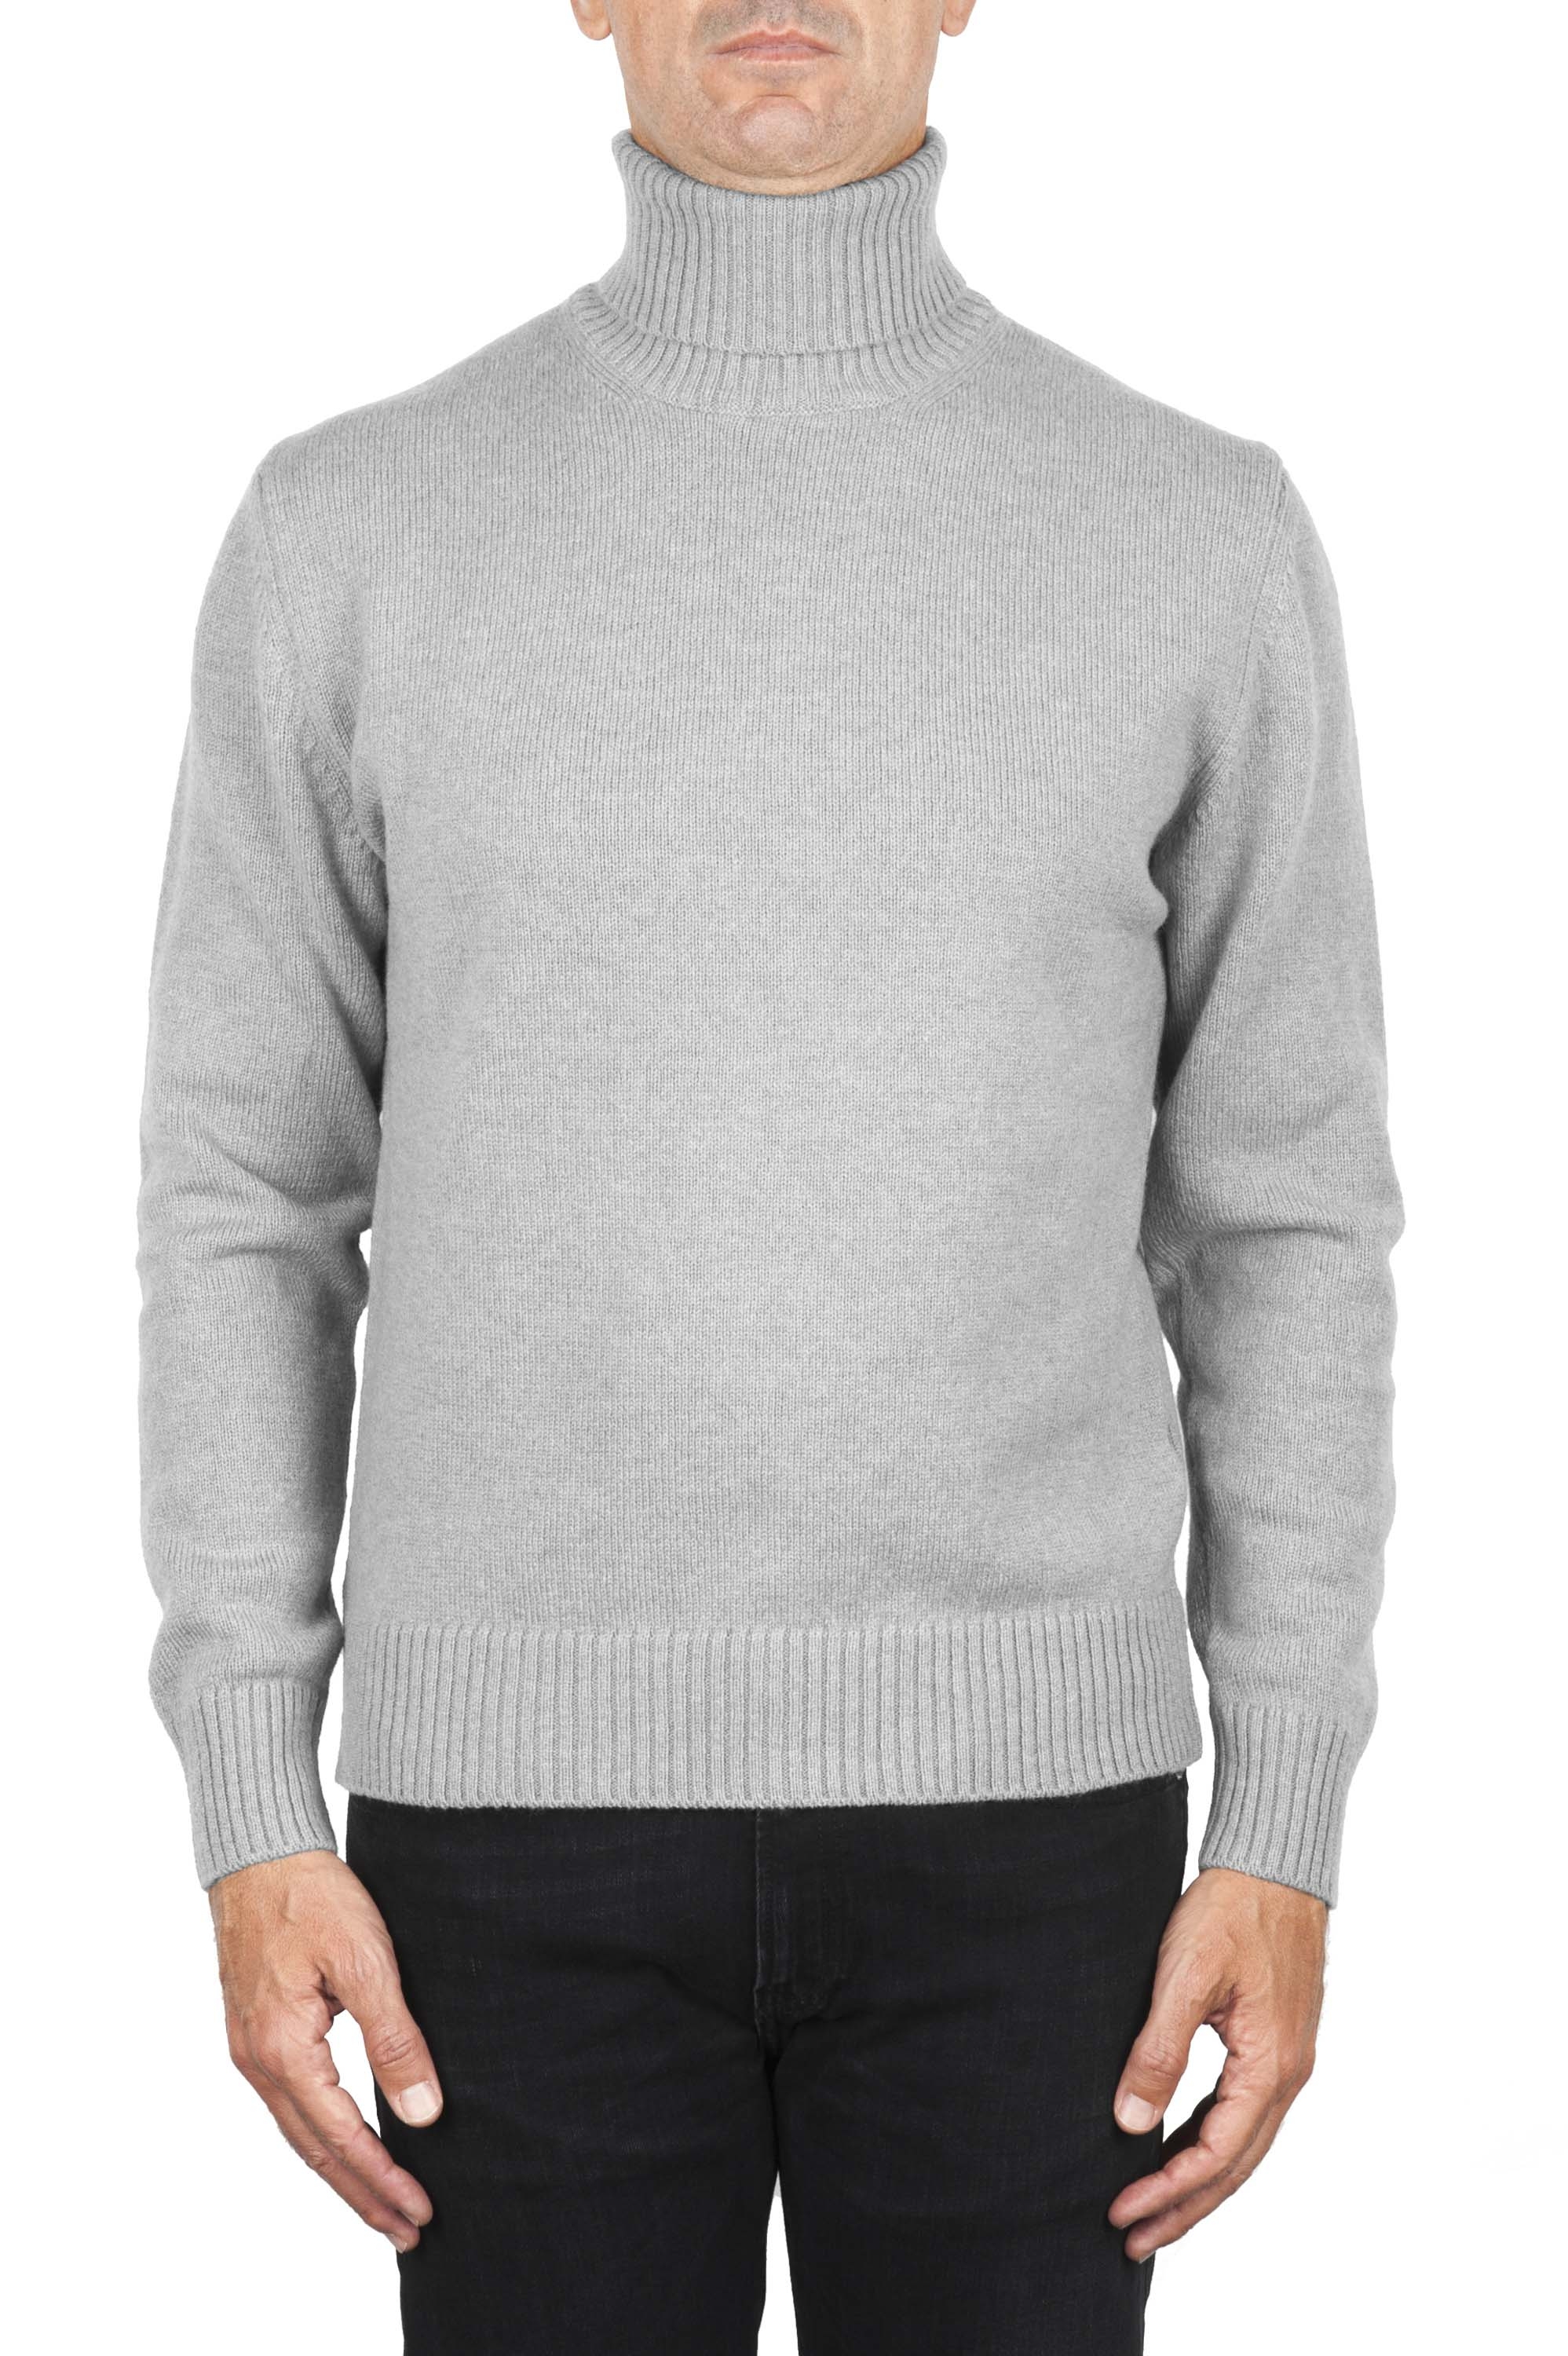 SBU 01856_19AW Grey roll-neck sweater in wool cashmere blend 01